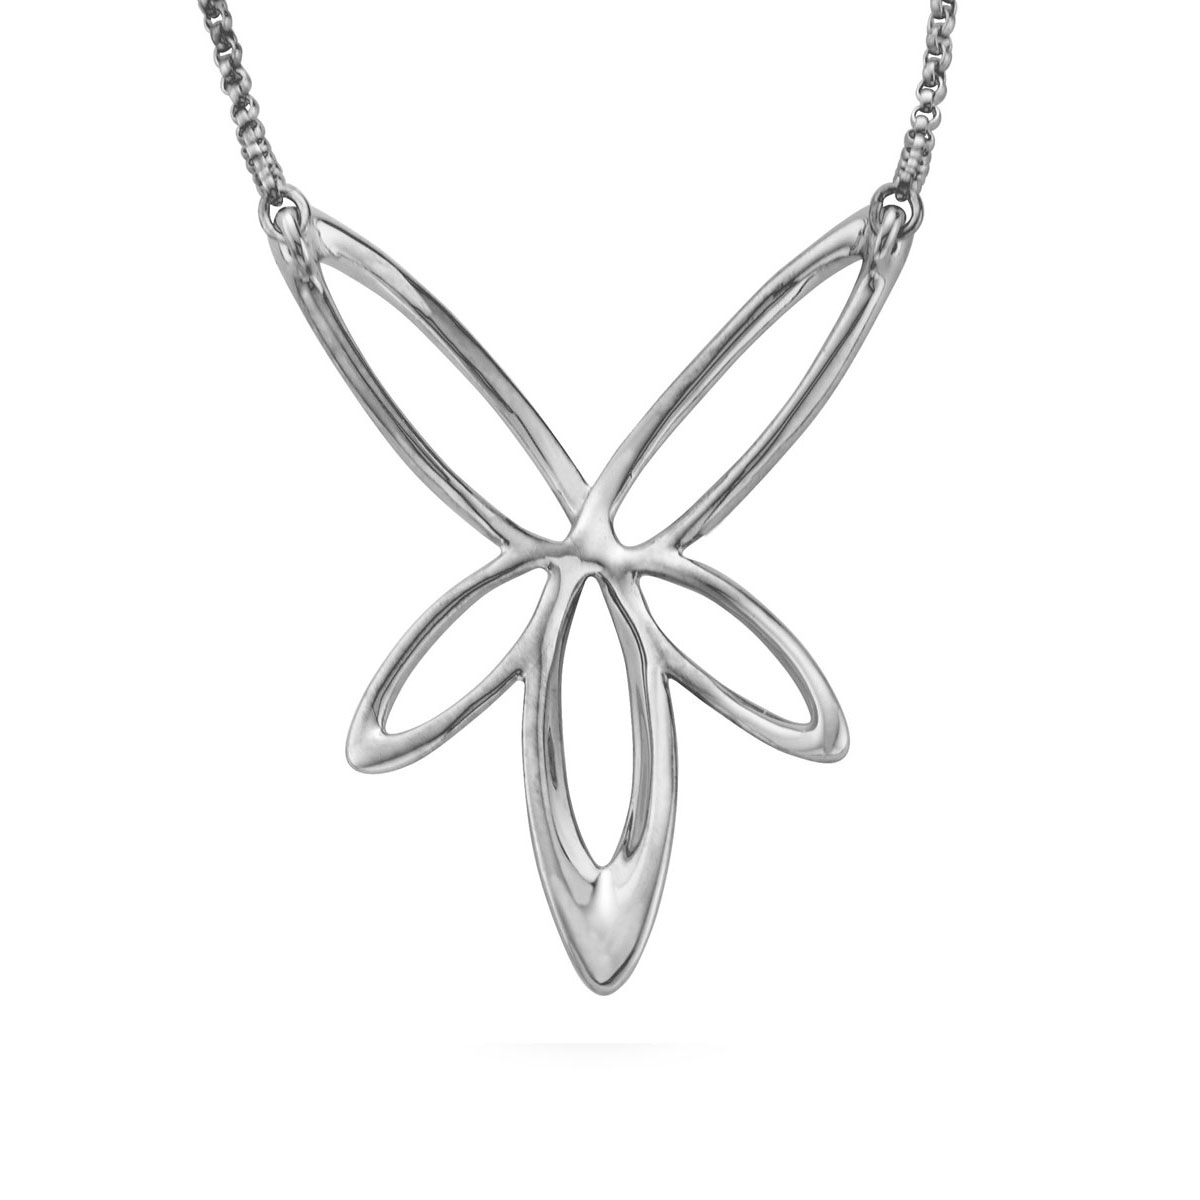 Nambe Jewelry Silver Star Necklace